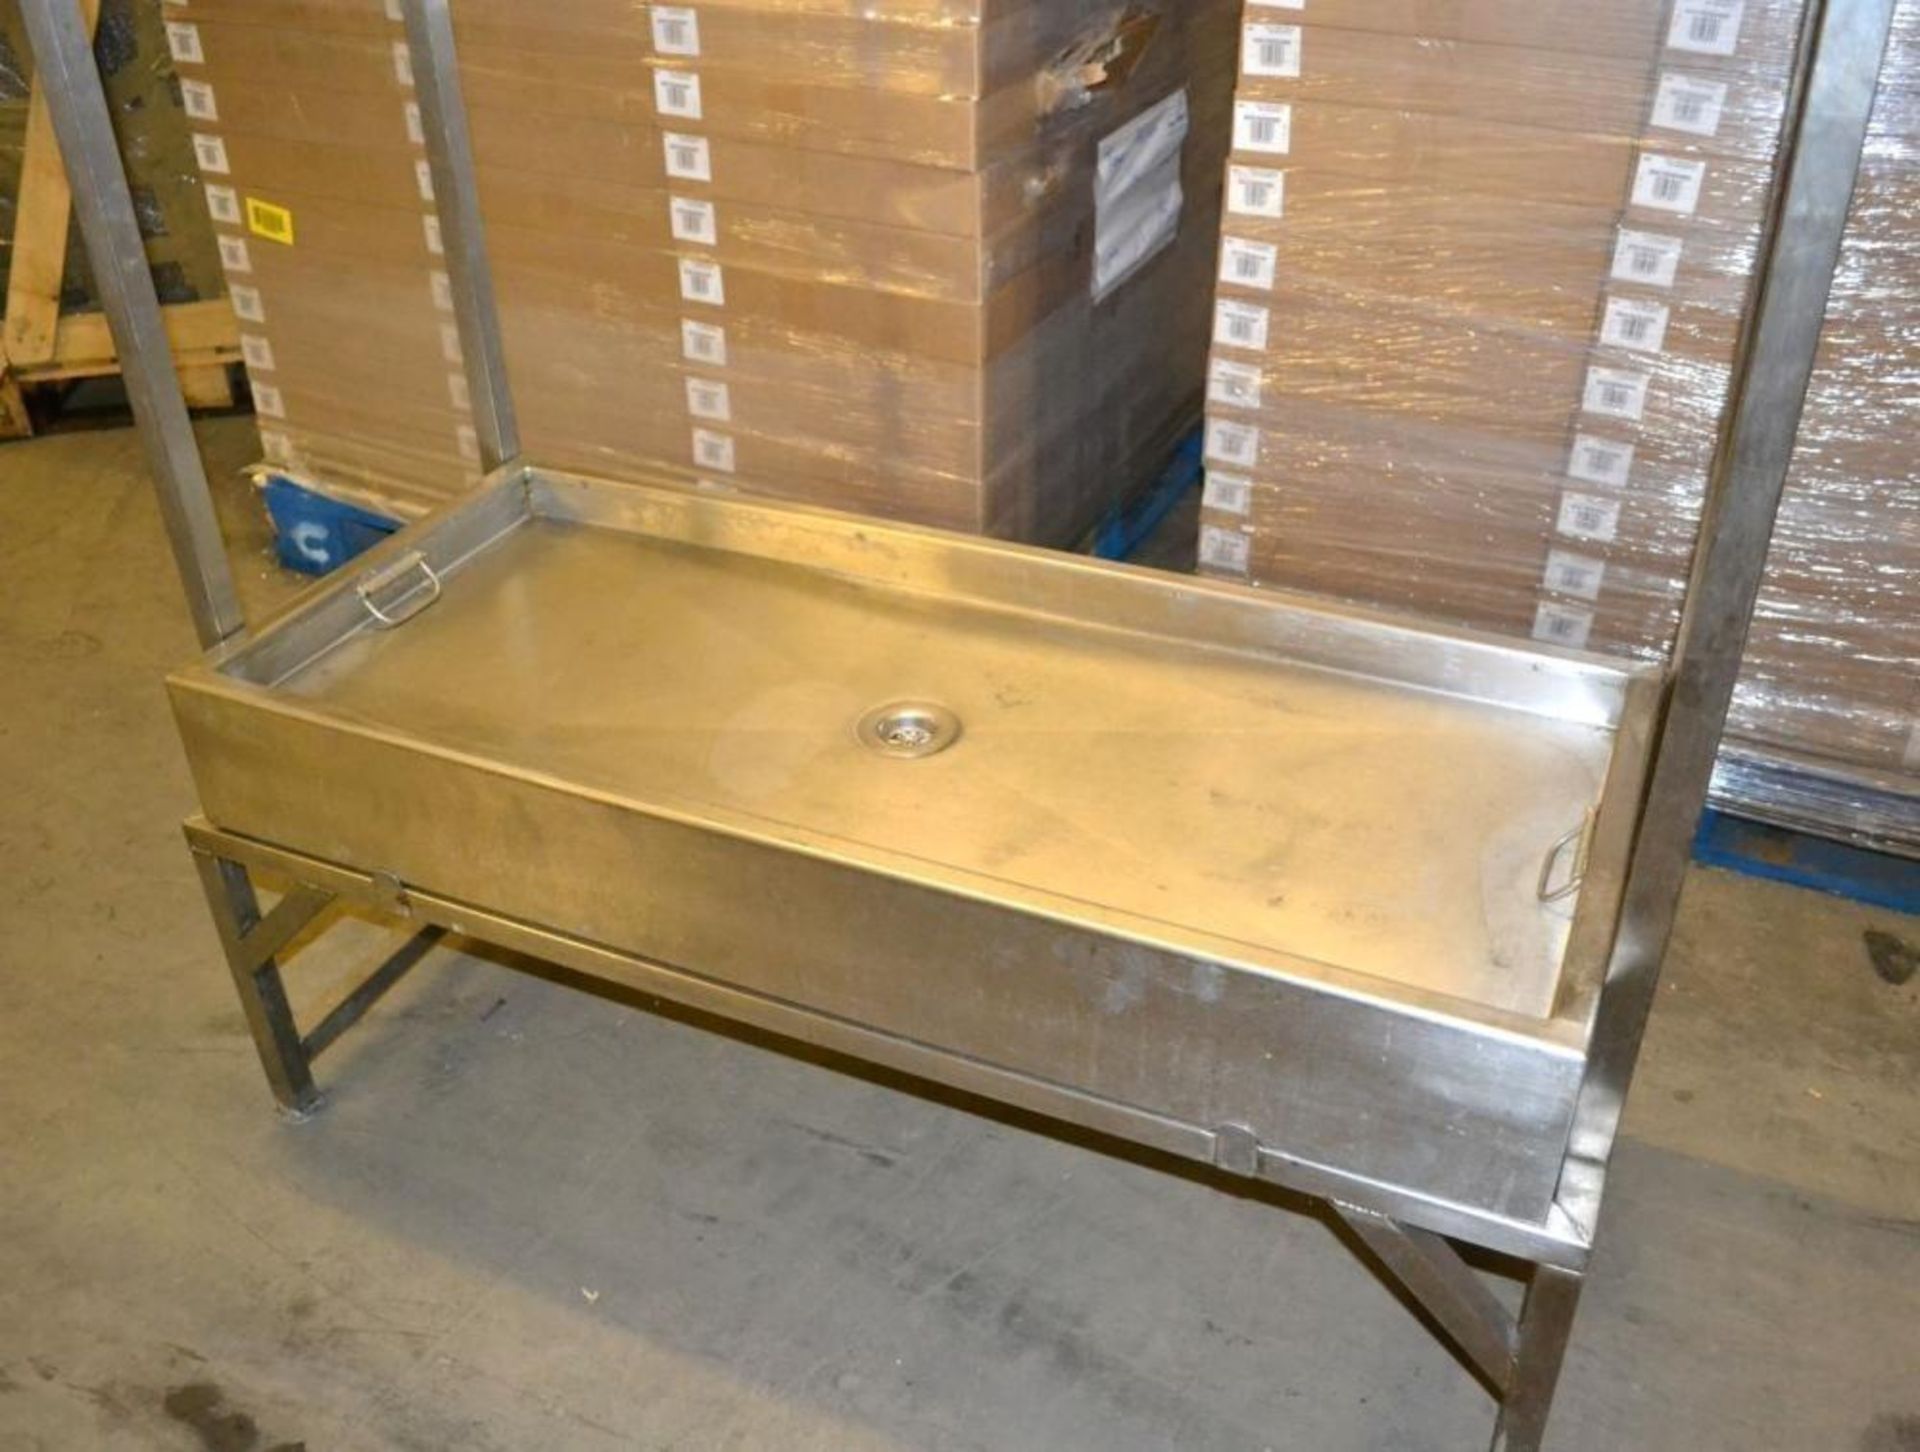 1 x Stainless Steel Rinse/Prep Area - Dimensions: 120 x 50 x 170cm - Ref: MC114 - CL282 - Location: - Image 3 of 5